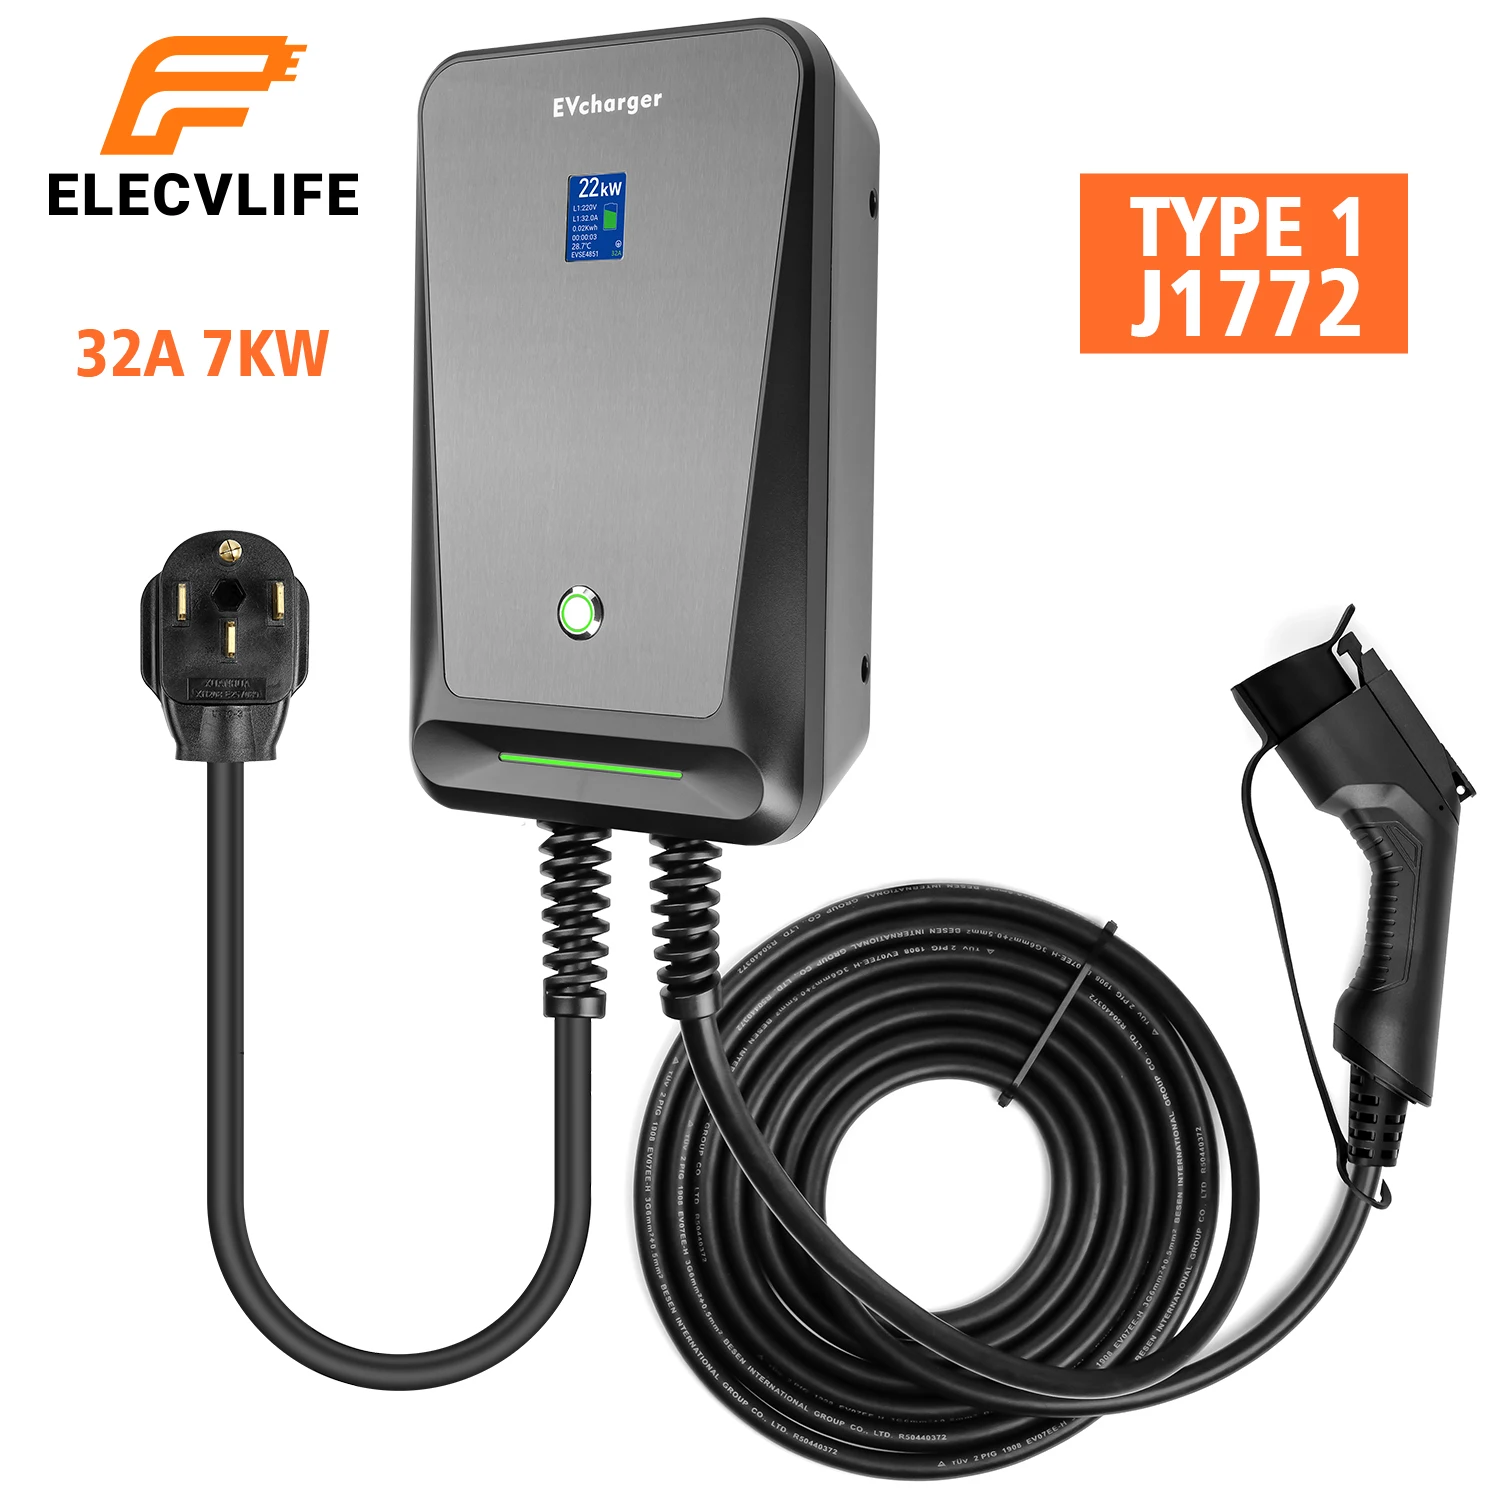 J1772 Electric Vehicle Charger	